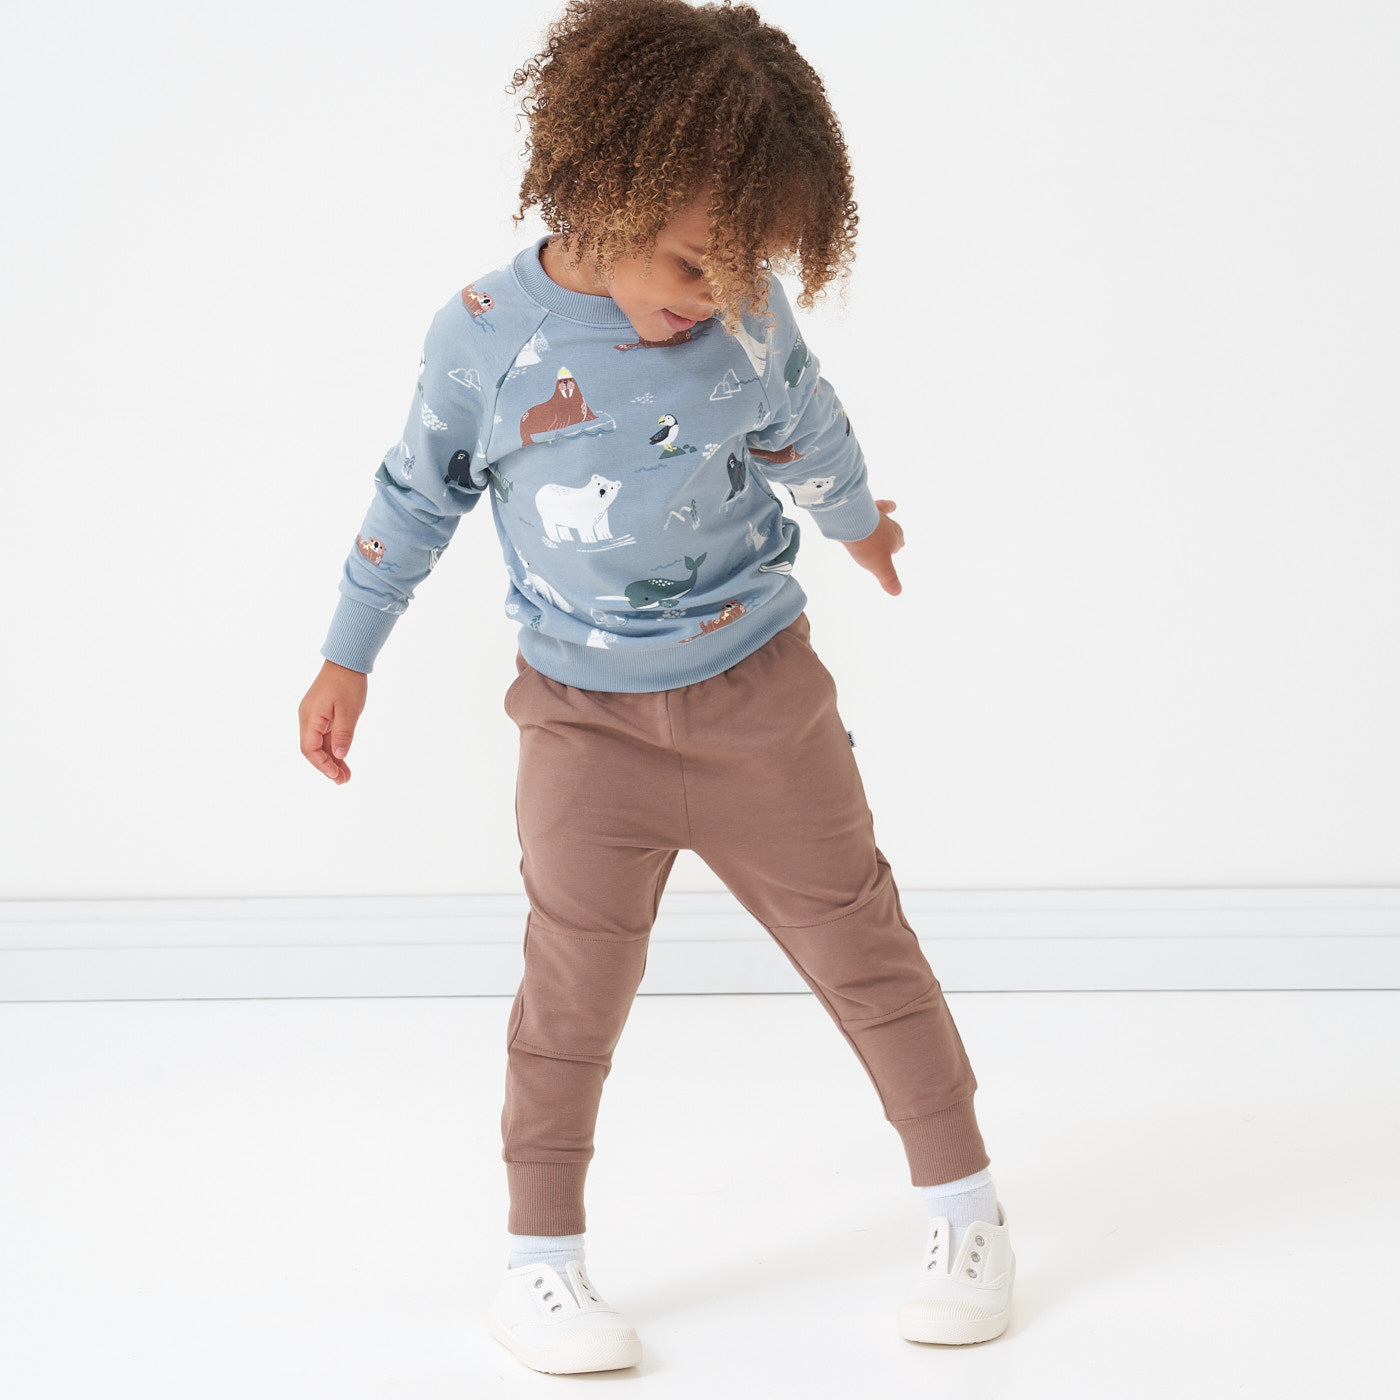 Alternate image of a child wearing Light Cocoa joggers and coordinating Arctic Animals crewneck sweatshirt